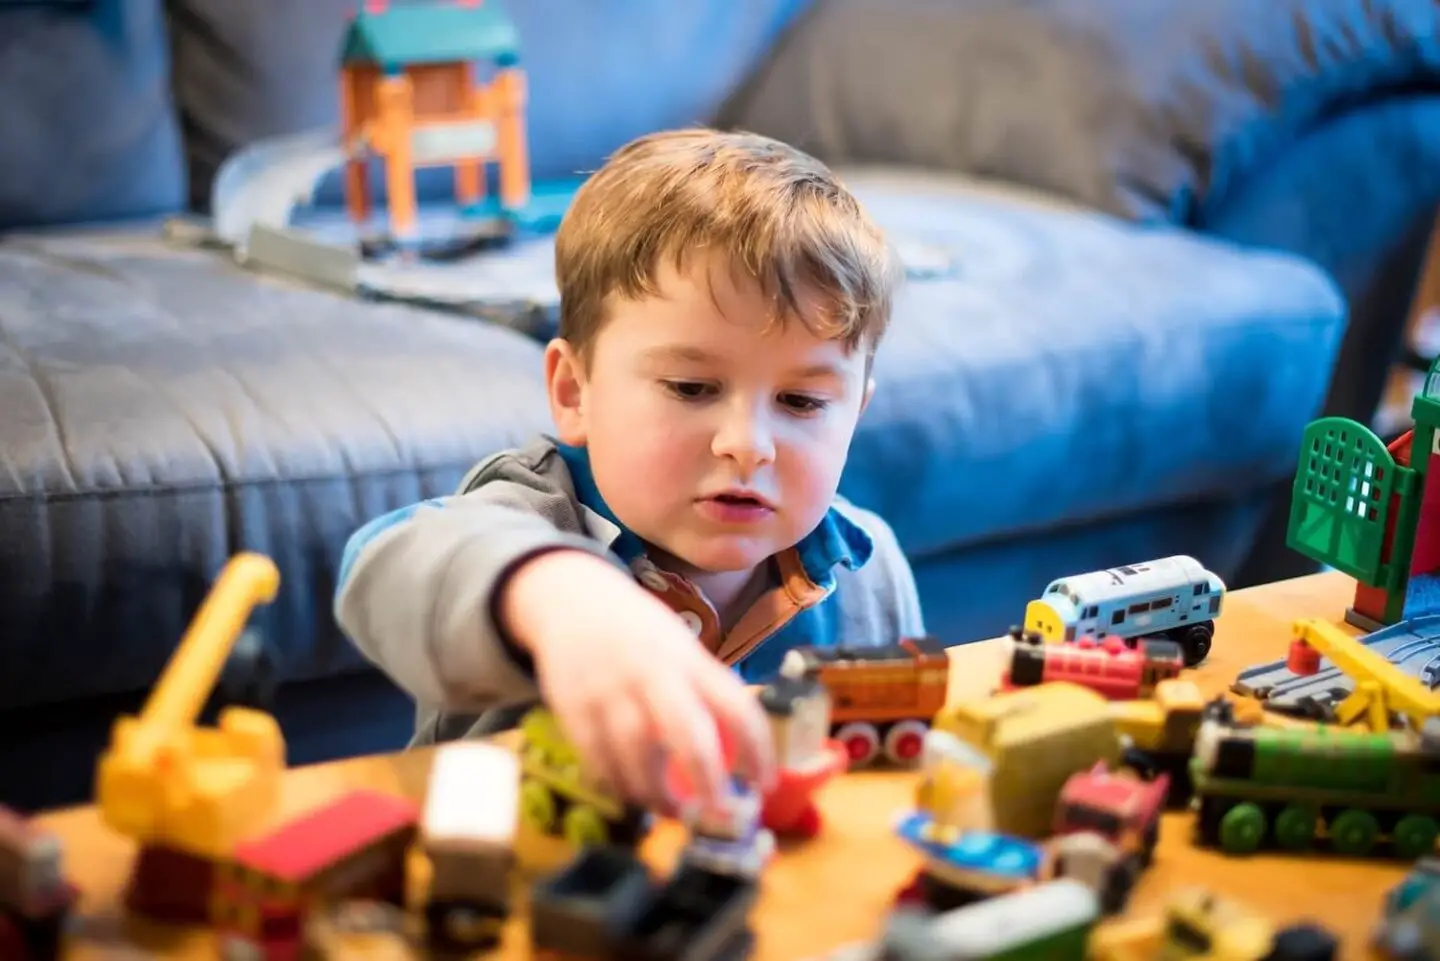 A boy sitting at a low table and playing with toy trains